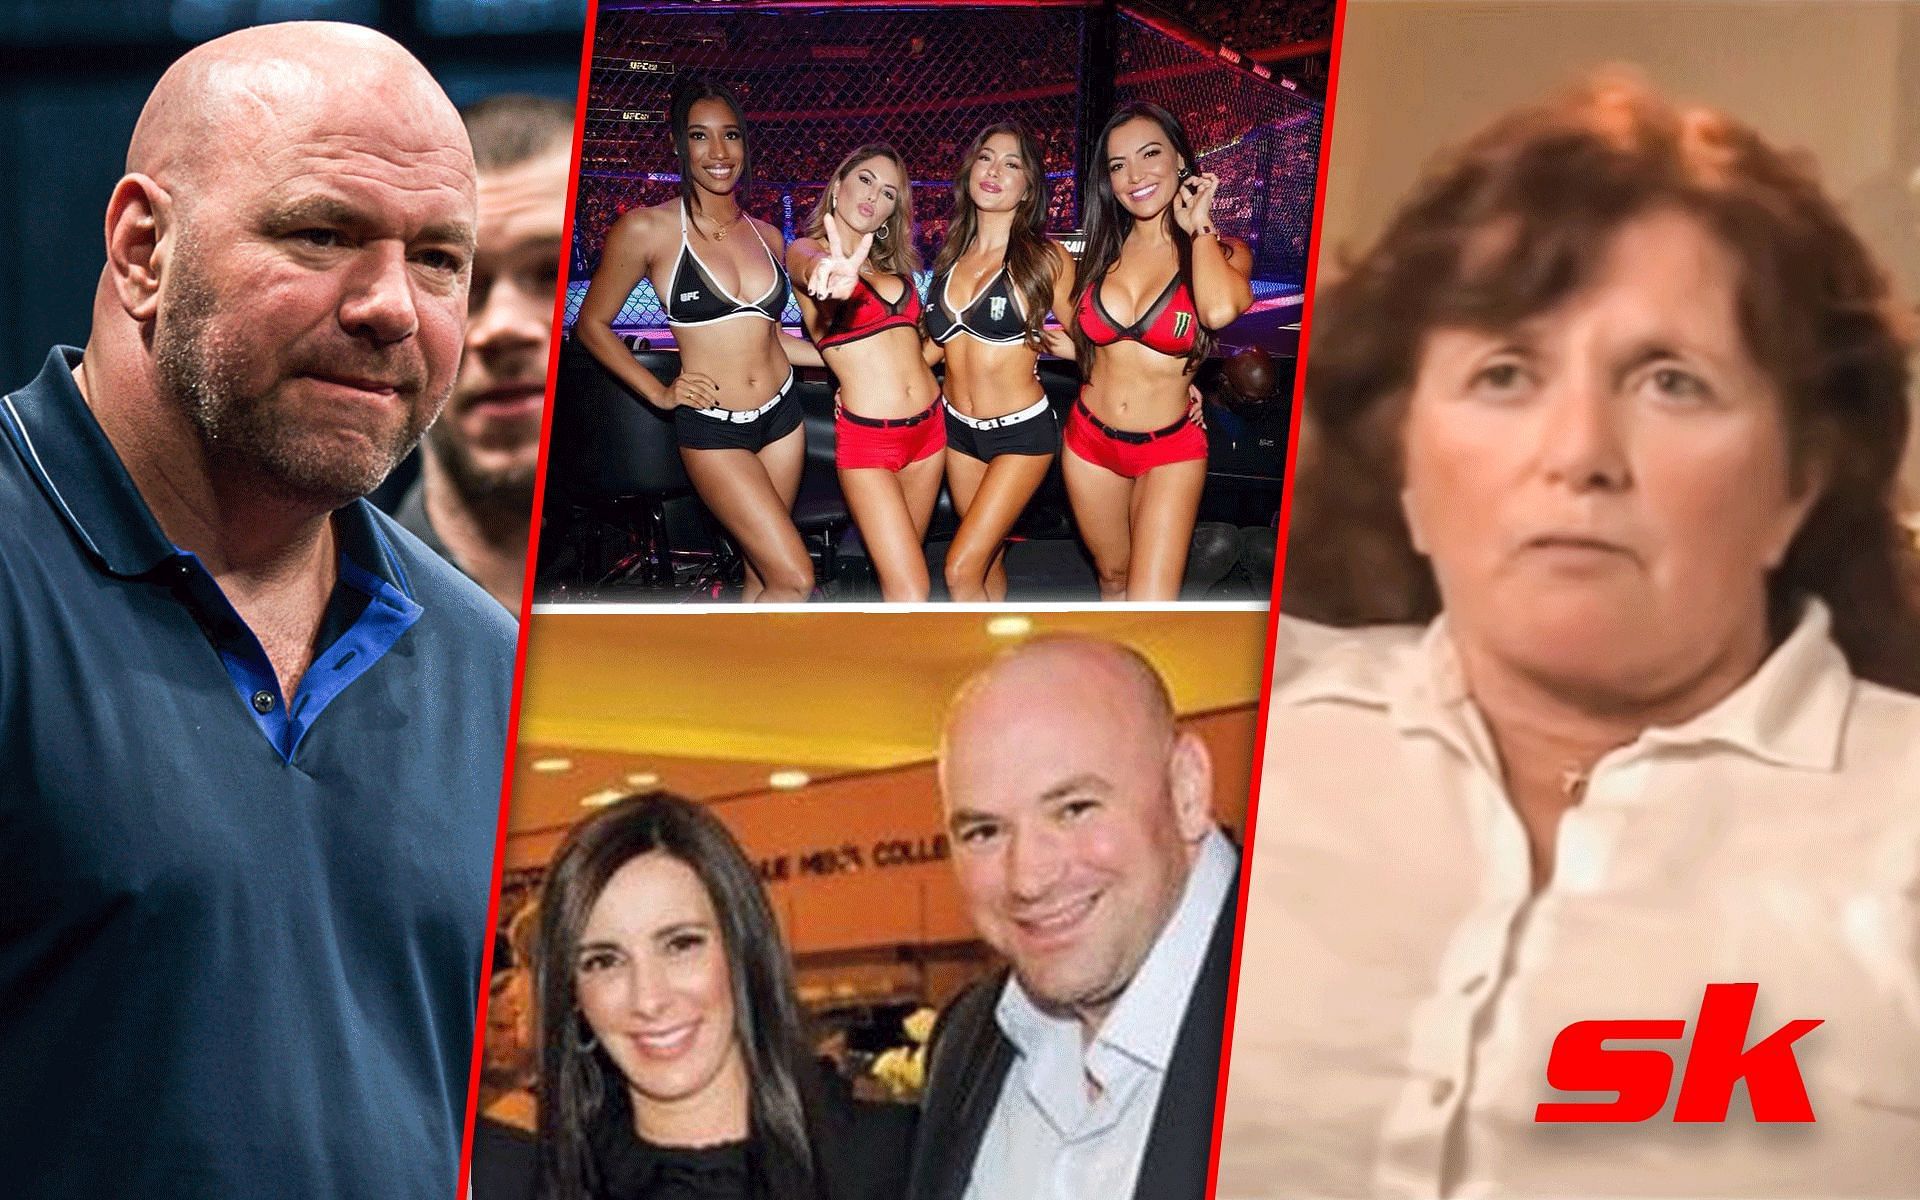 Throwback When Dana Whites mother accused him of cheating on his wife with ring girls pic